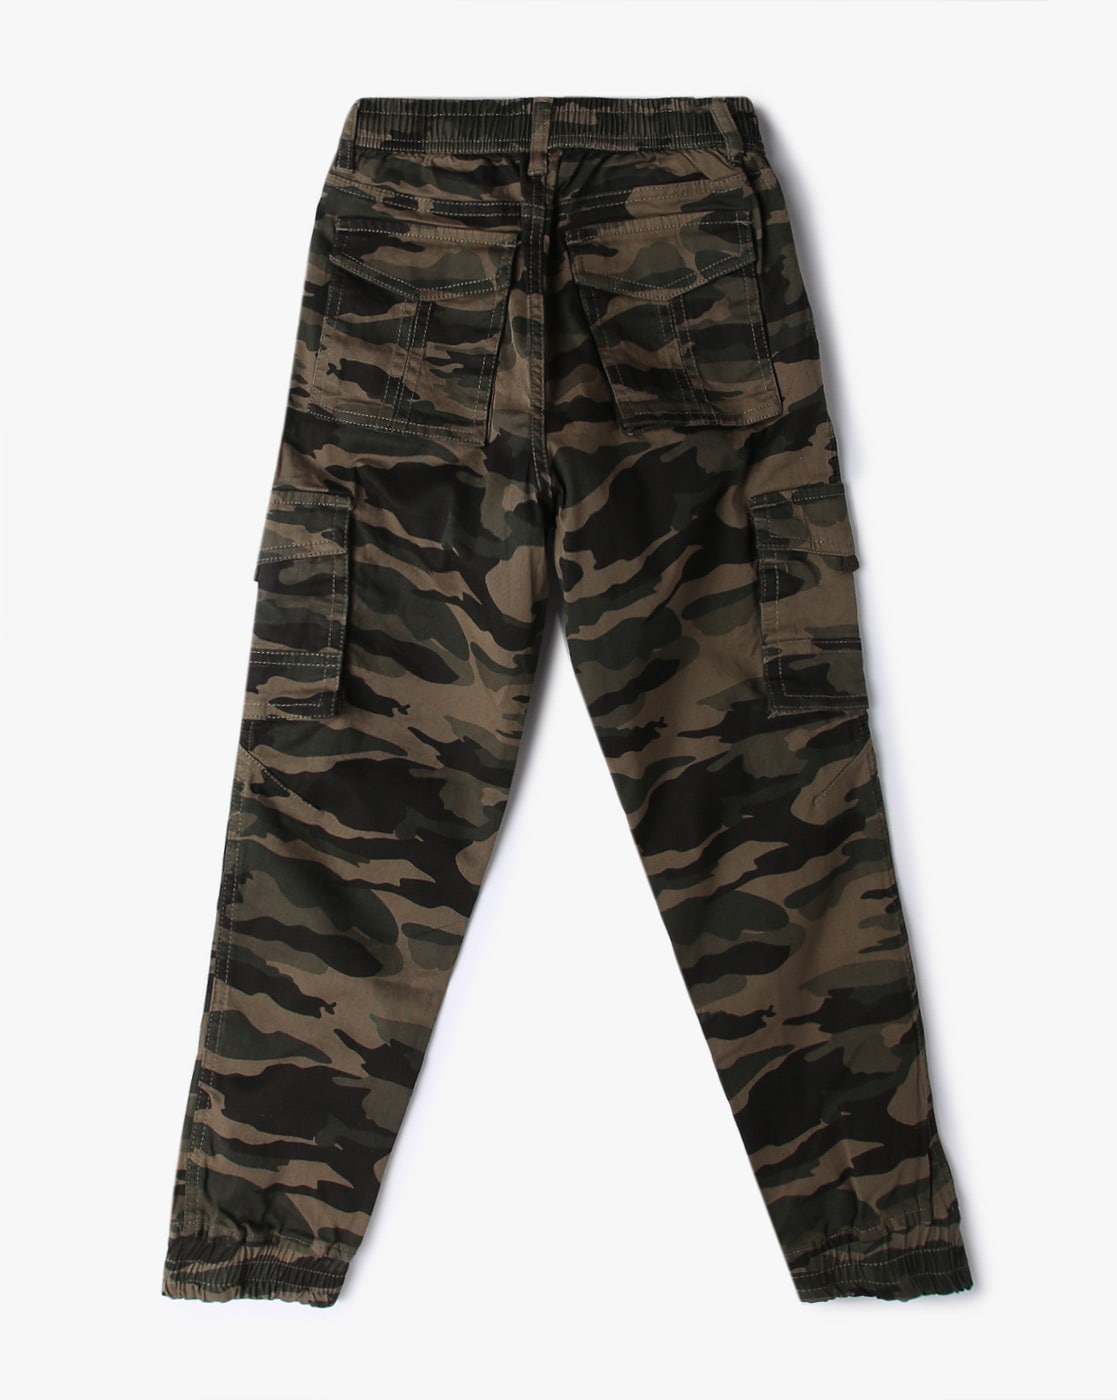 M65 Woodland Trousers, Cold Weather 1985